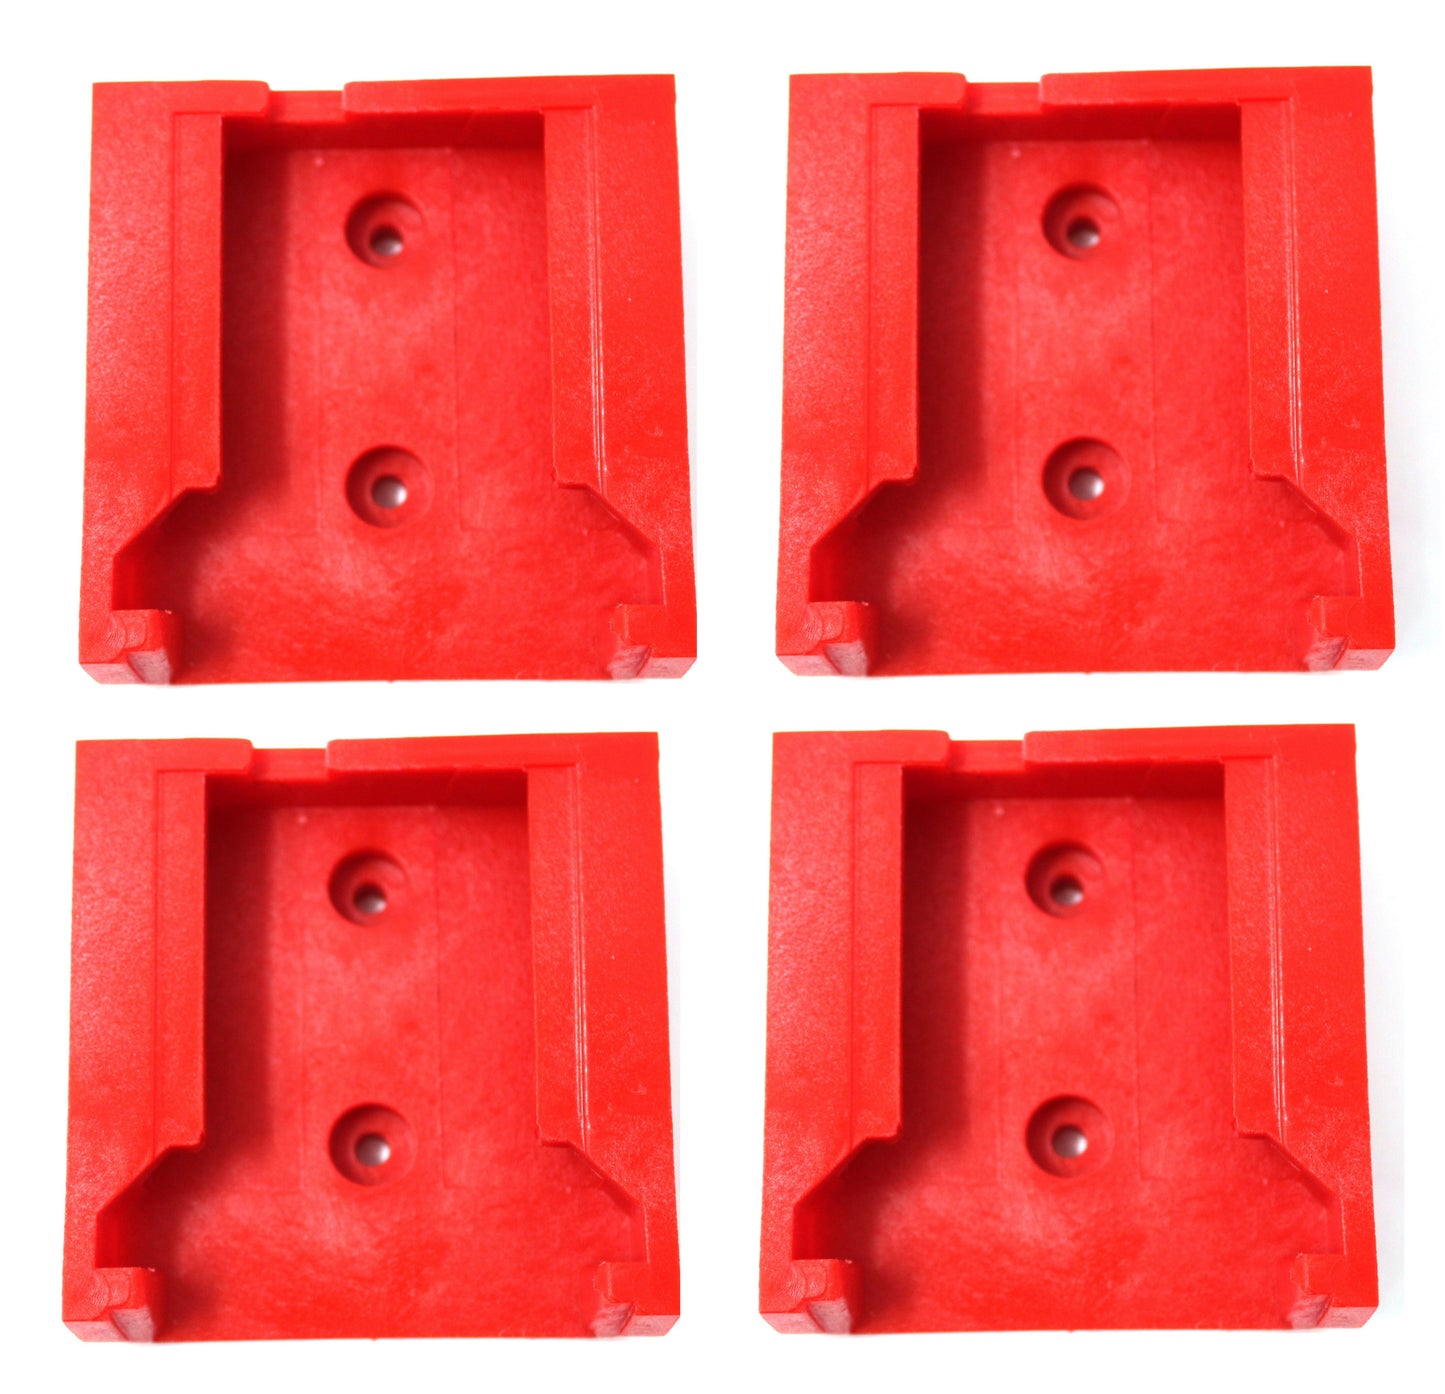 Plastic M18 Battery Holder Wall Mount with Screw Holes Compatible with Milwaukee M18 Batteries